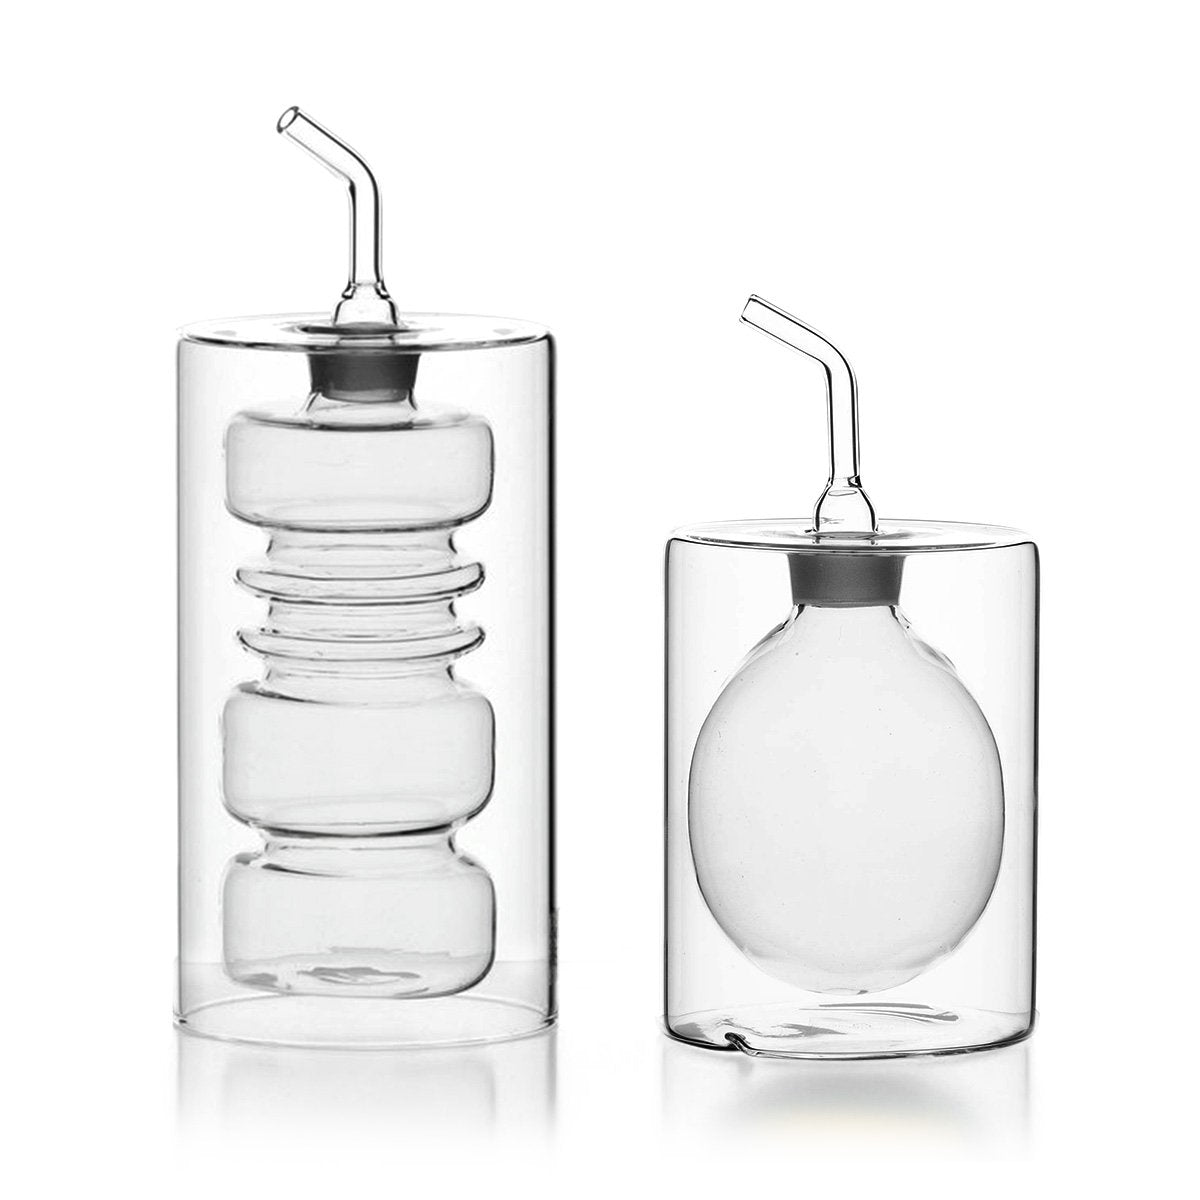 Large Rings and Medium Cilindro Double Walled Cruet Set